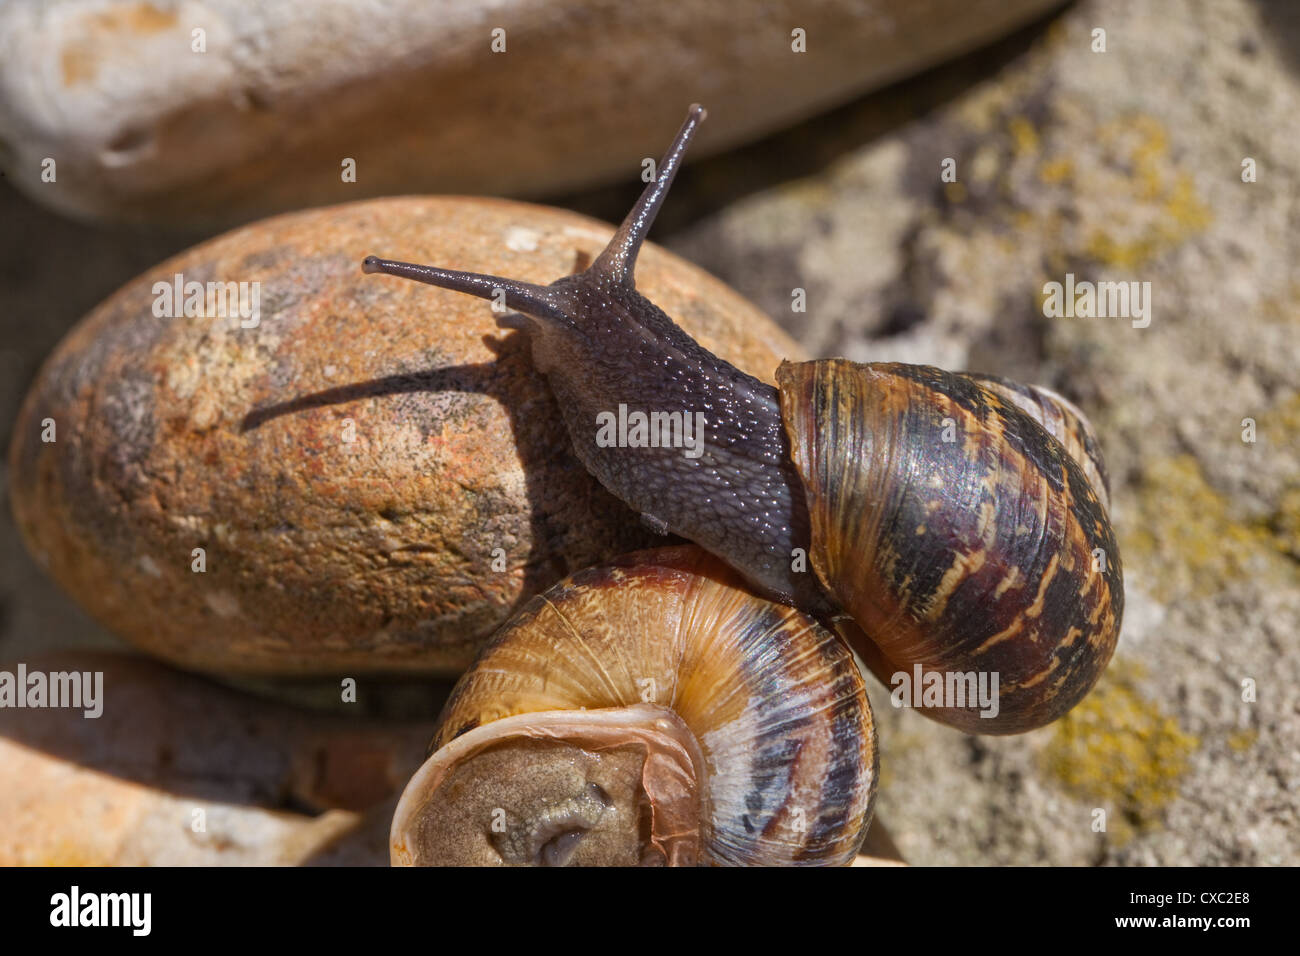 Garden Snails (Helix aspersa). One clambering over another, showing eyes 'on stalks', or upper tentacles. Stock Photo